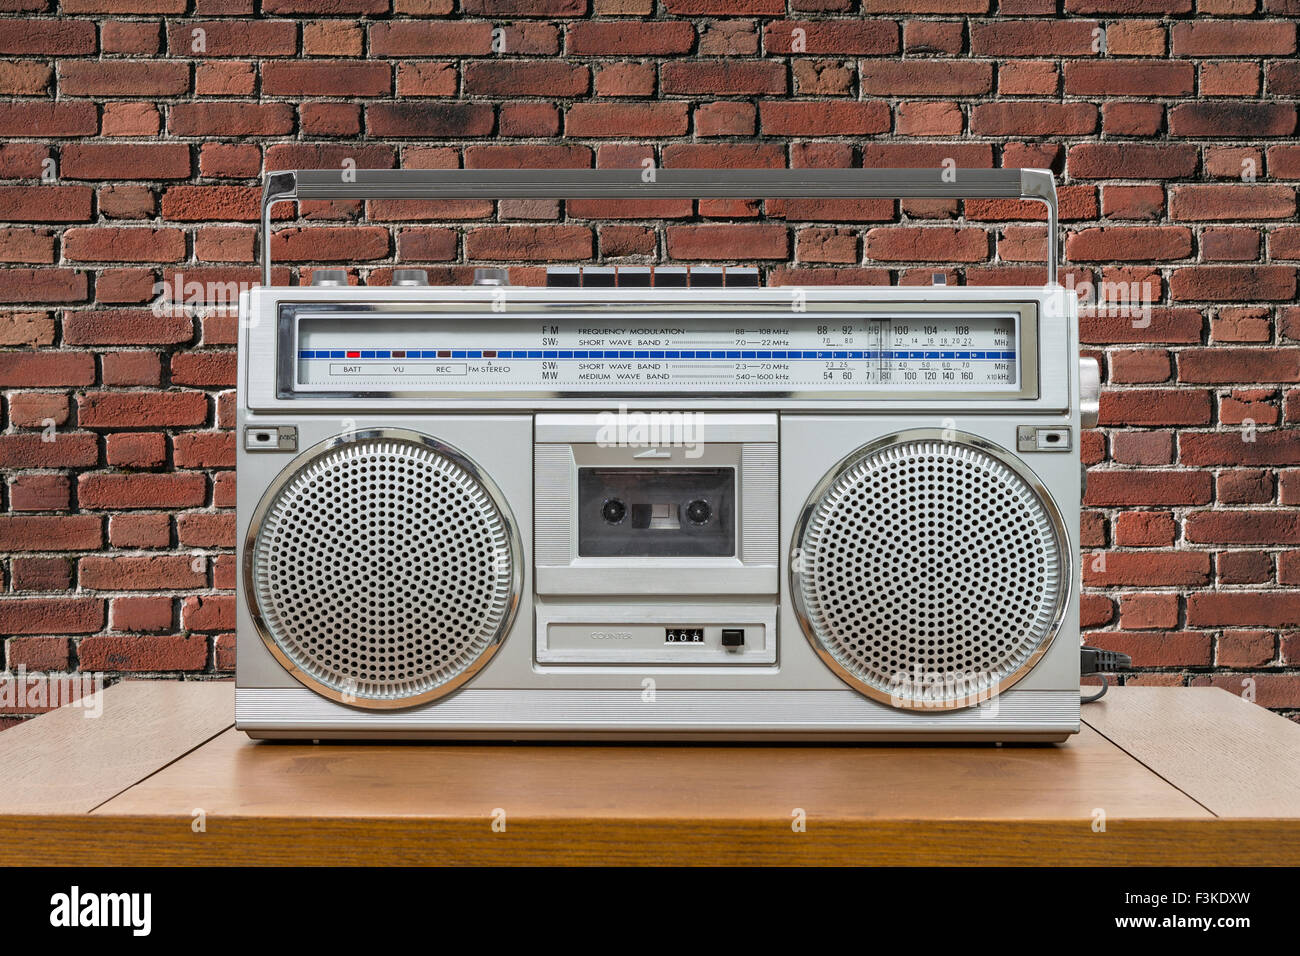 Vintage boombox on wood table with red brick wall. Stock Photo